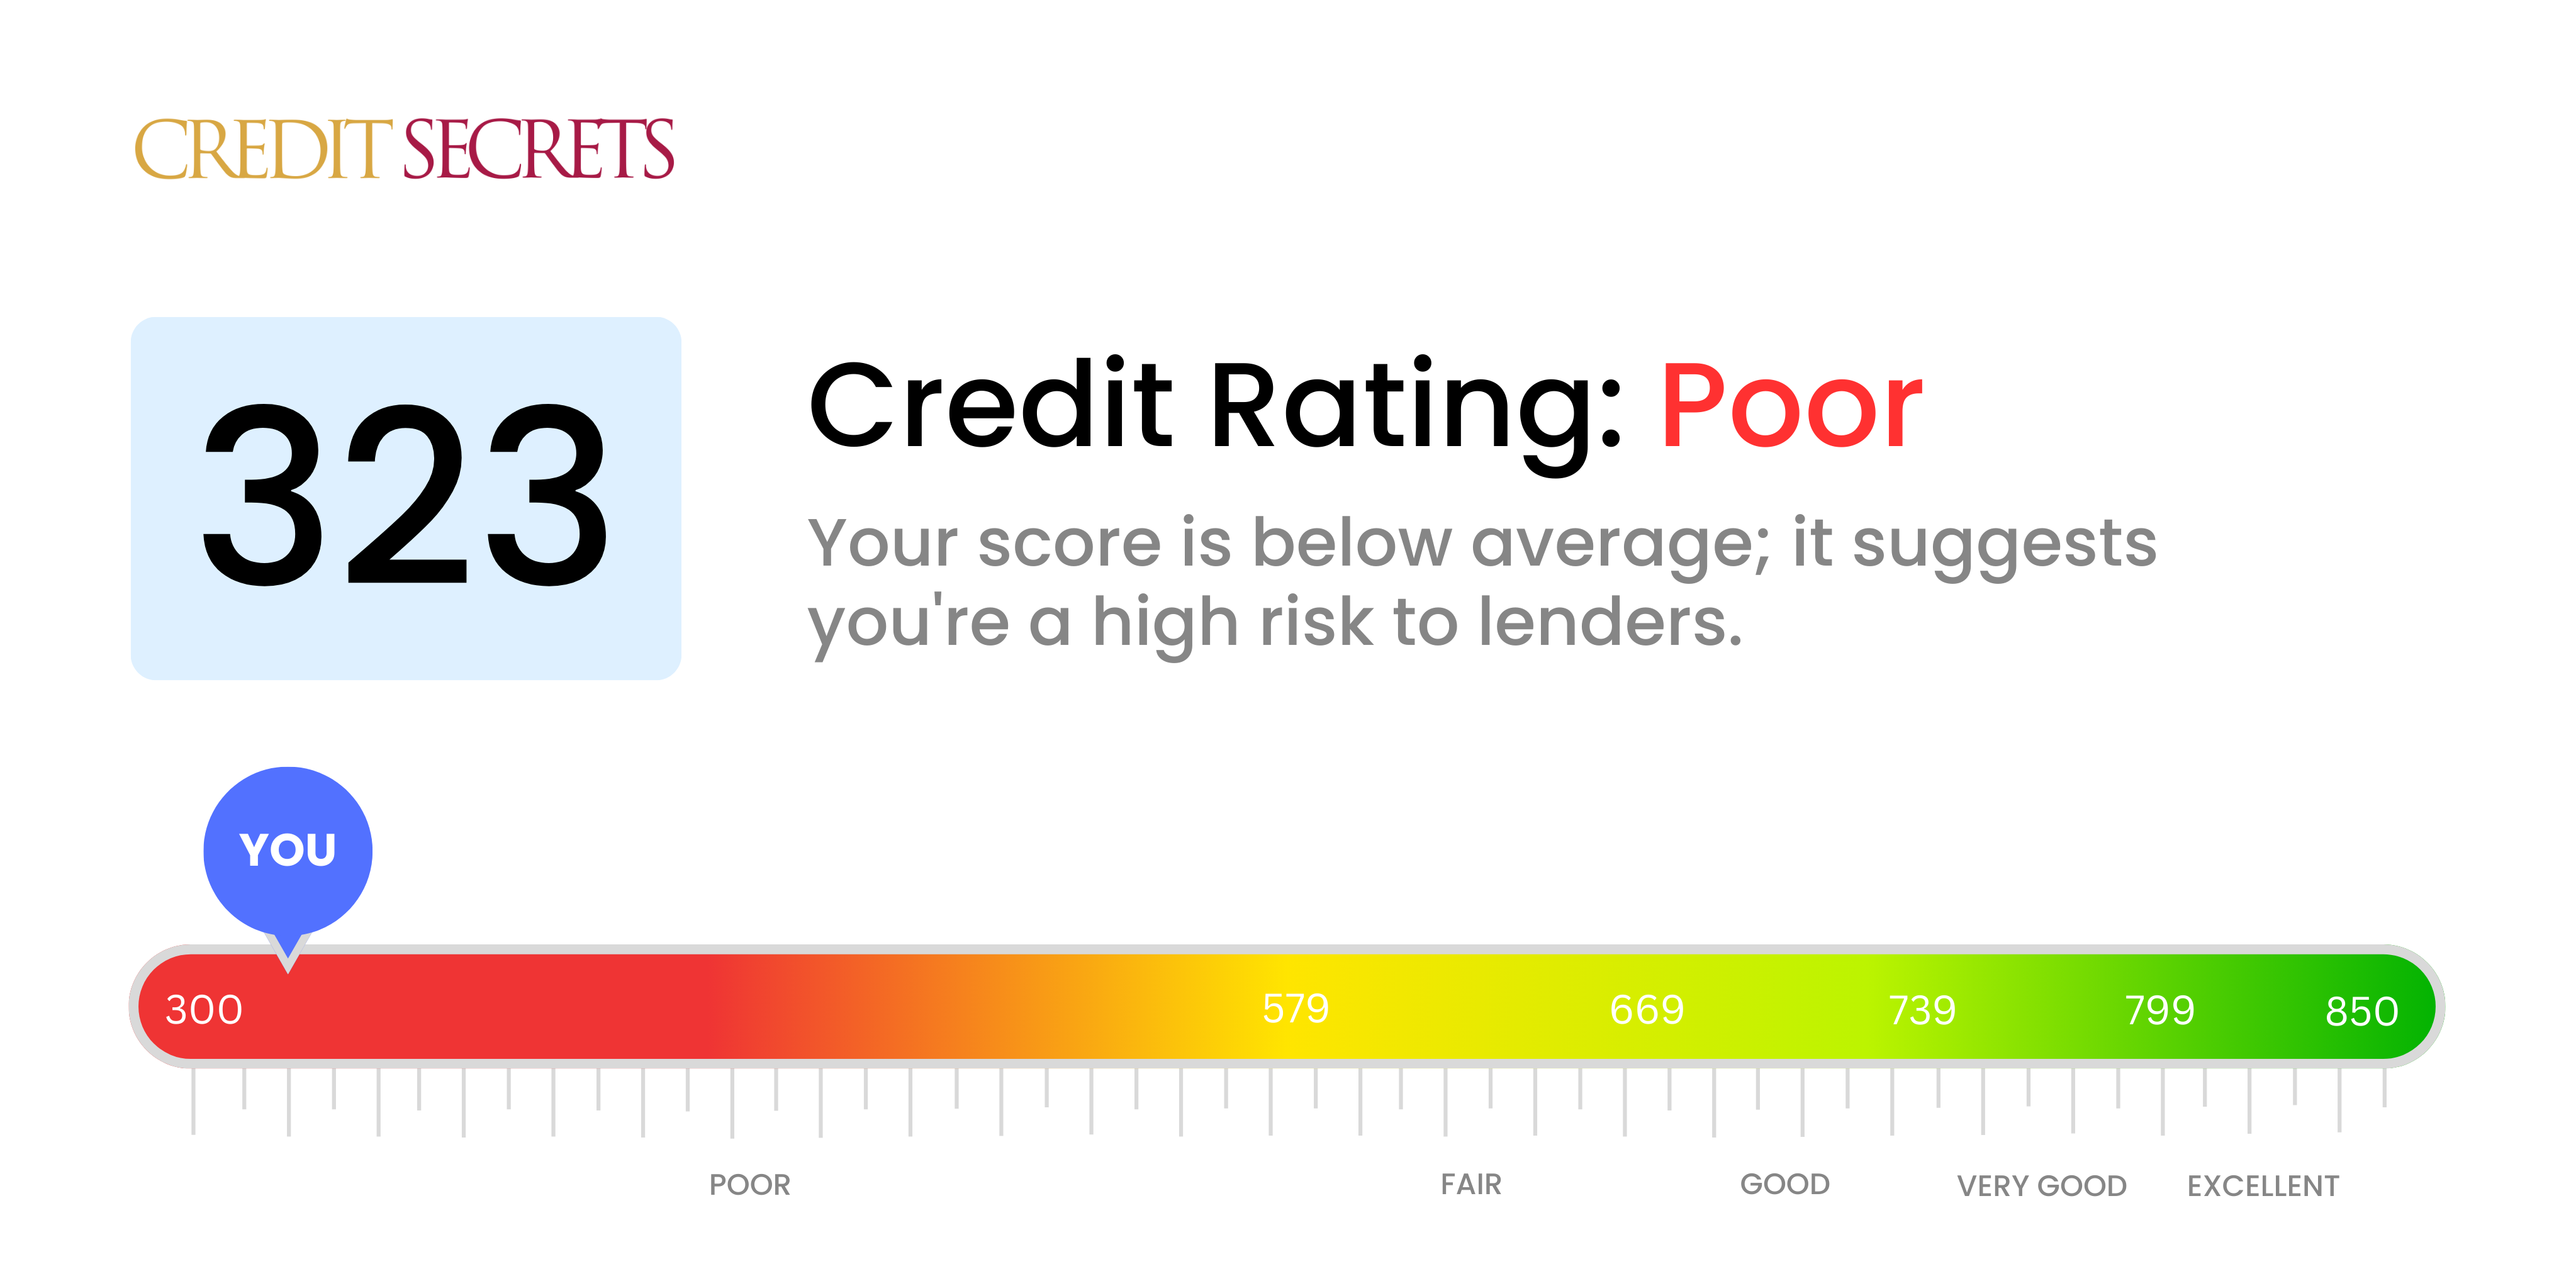 Is 323 a good credit score?